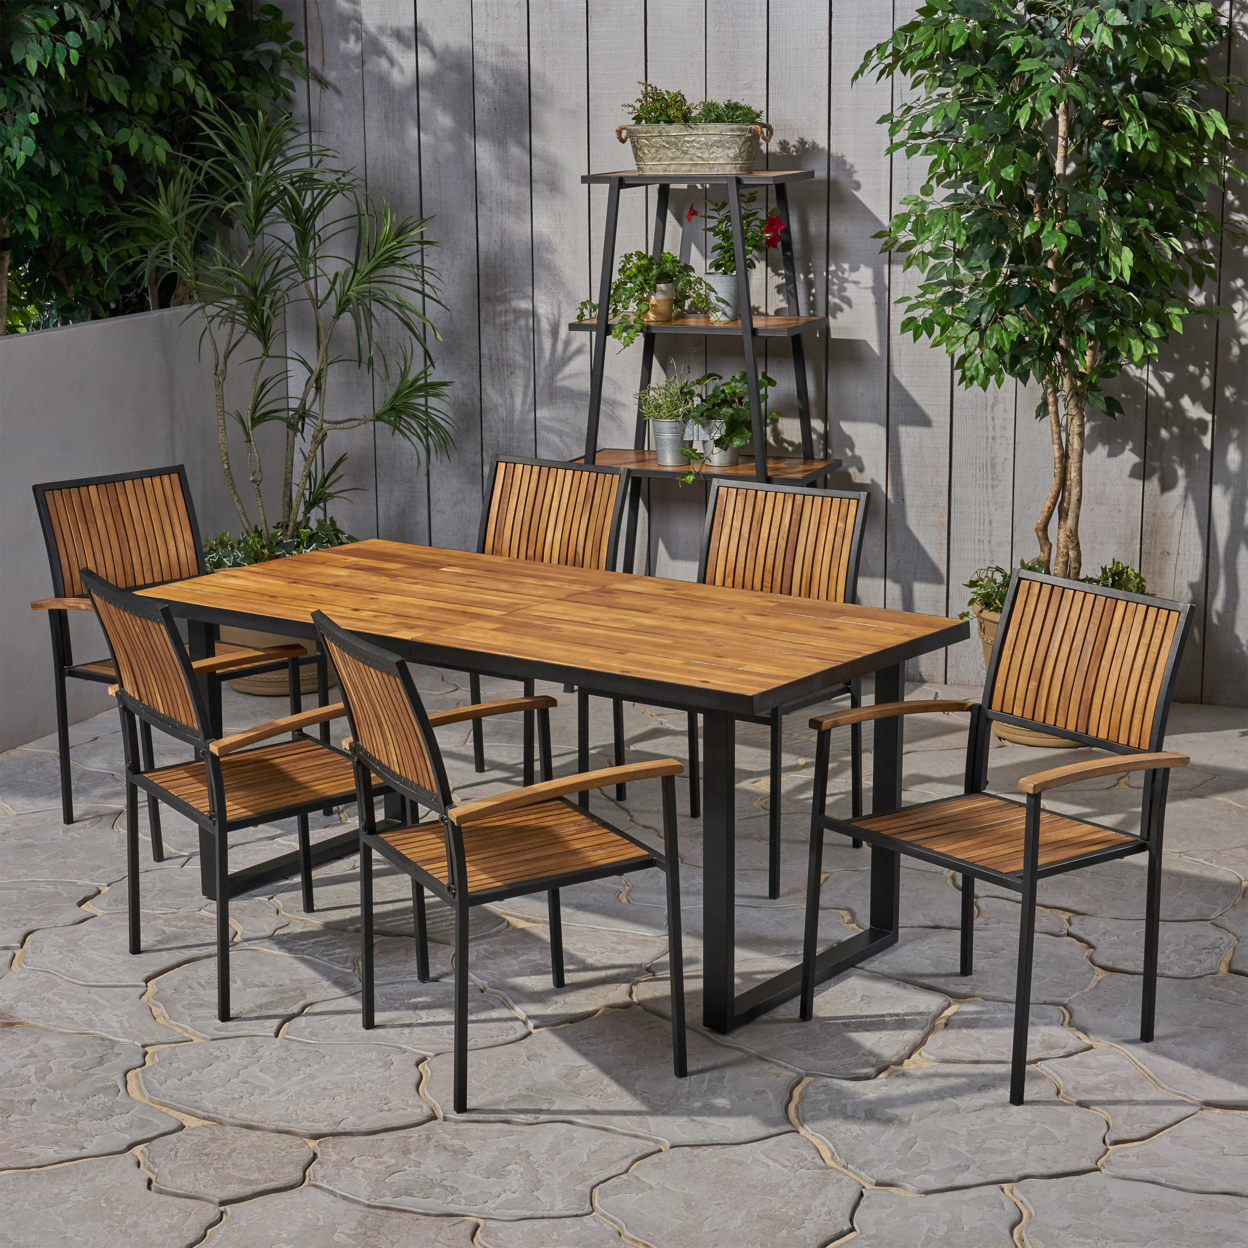 Aurora Outdoor 6 Seater Acacia Wood Dining Set With An Iron Frame